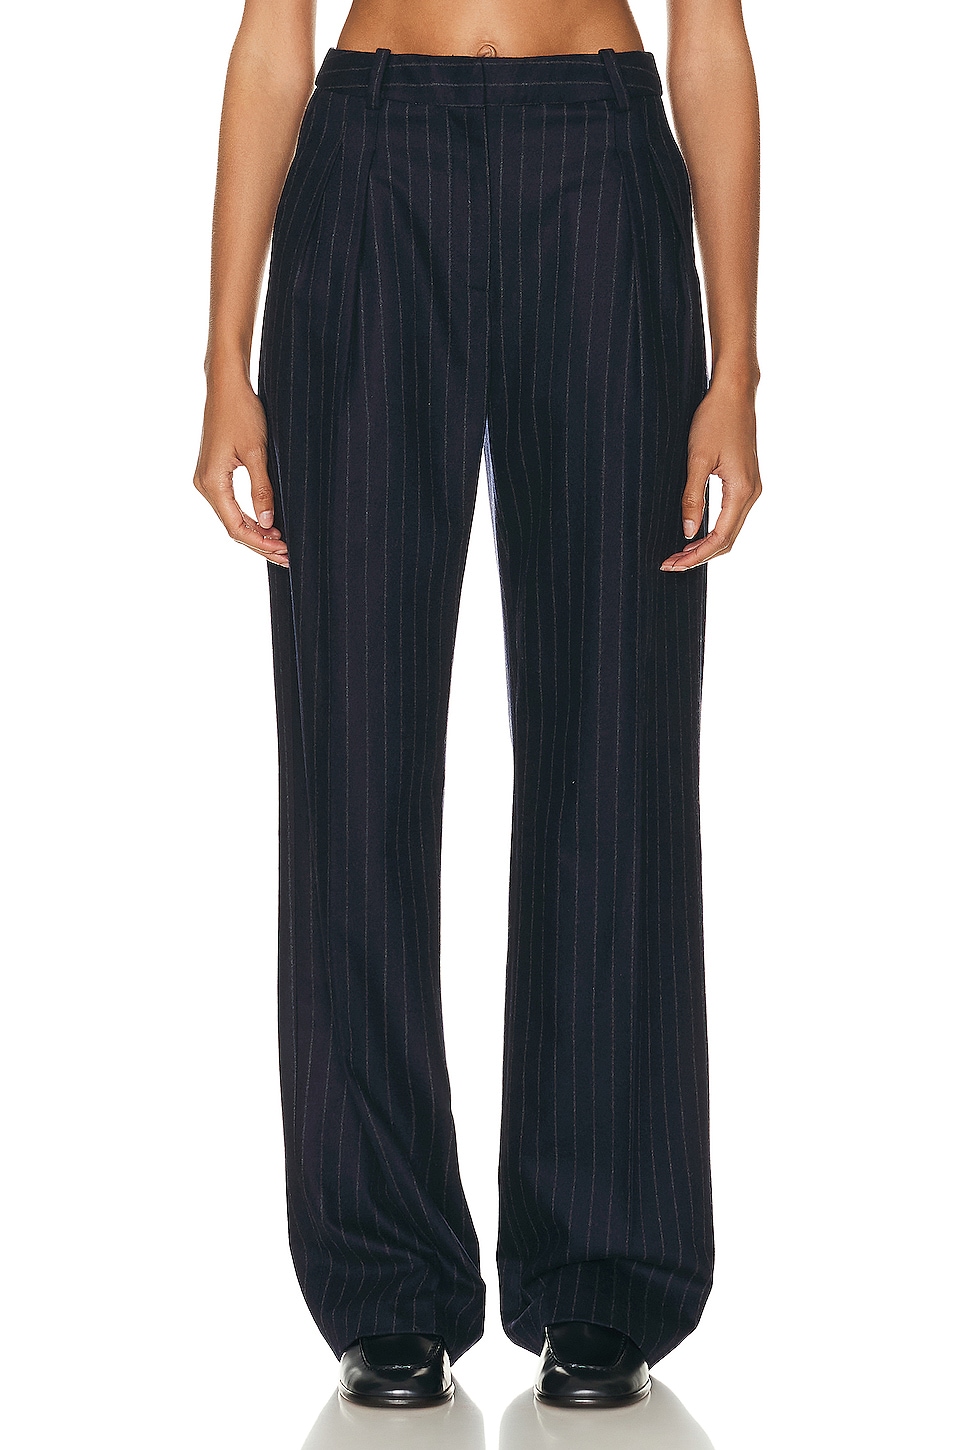 Image 1 of Loulou Studio Amoya Wide Leg Pant in Navy Stripes